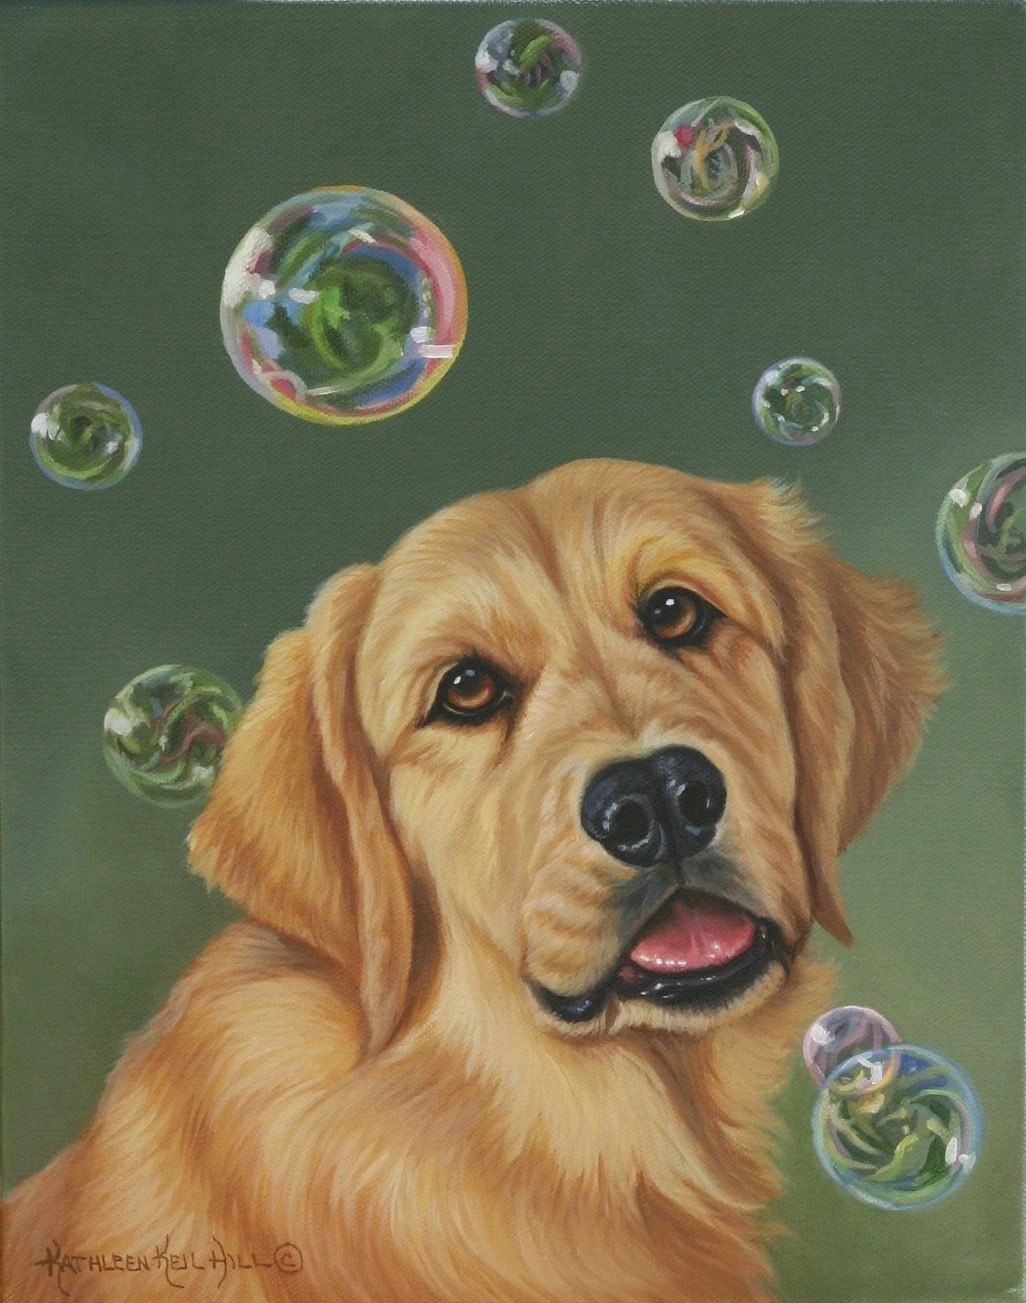 tiny bubbles a portrait of a golden retriever puppy and his first experience with bubbles 14x11 oil on canvas